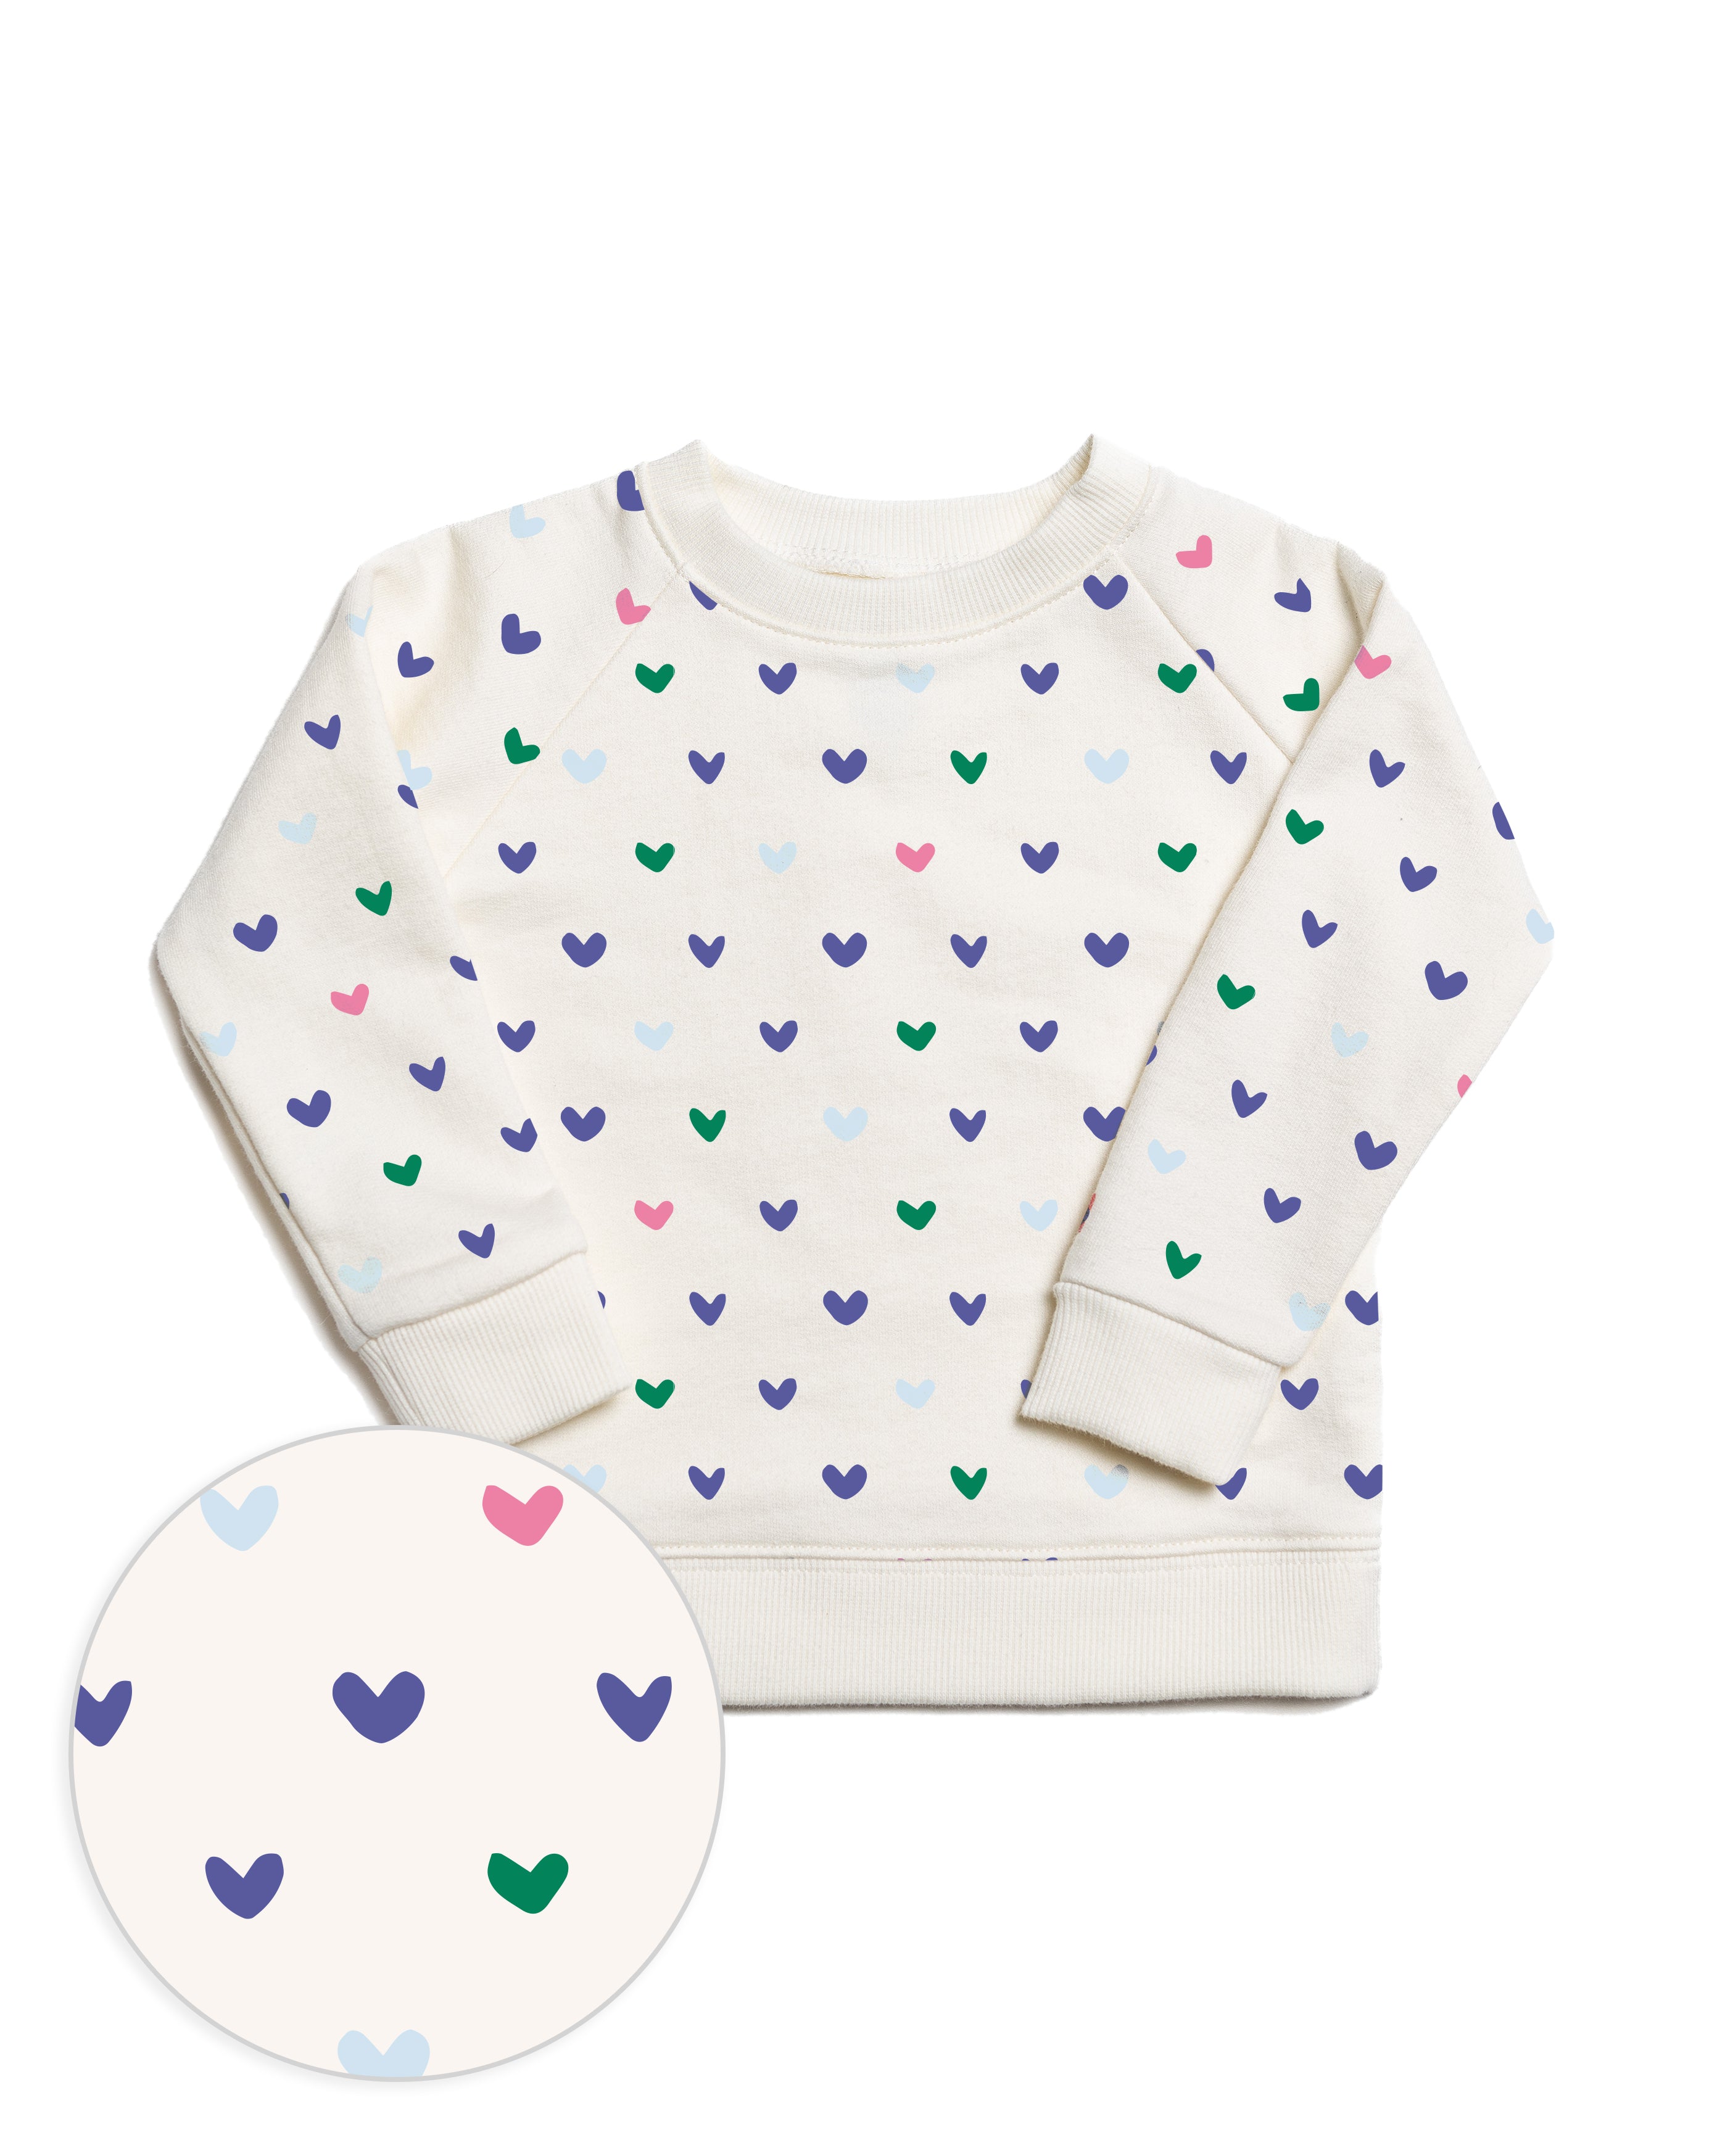 The Organic Printed Pullover Sweatshirt #color_Jelly Bean Hearts on Cream